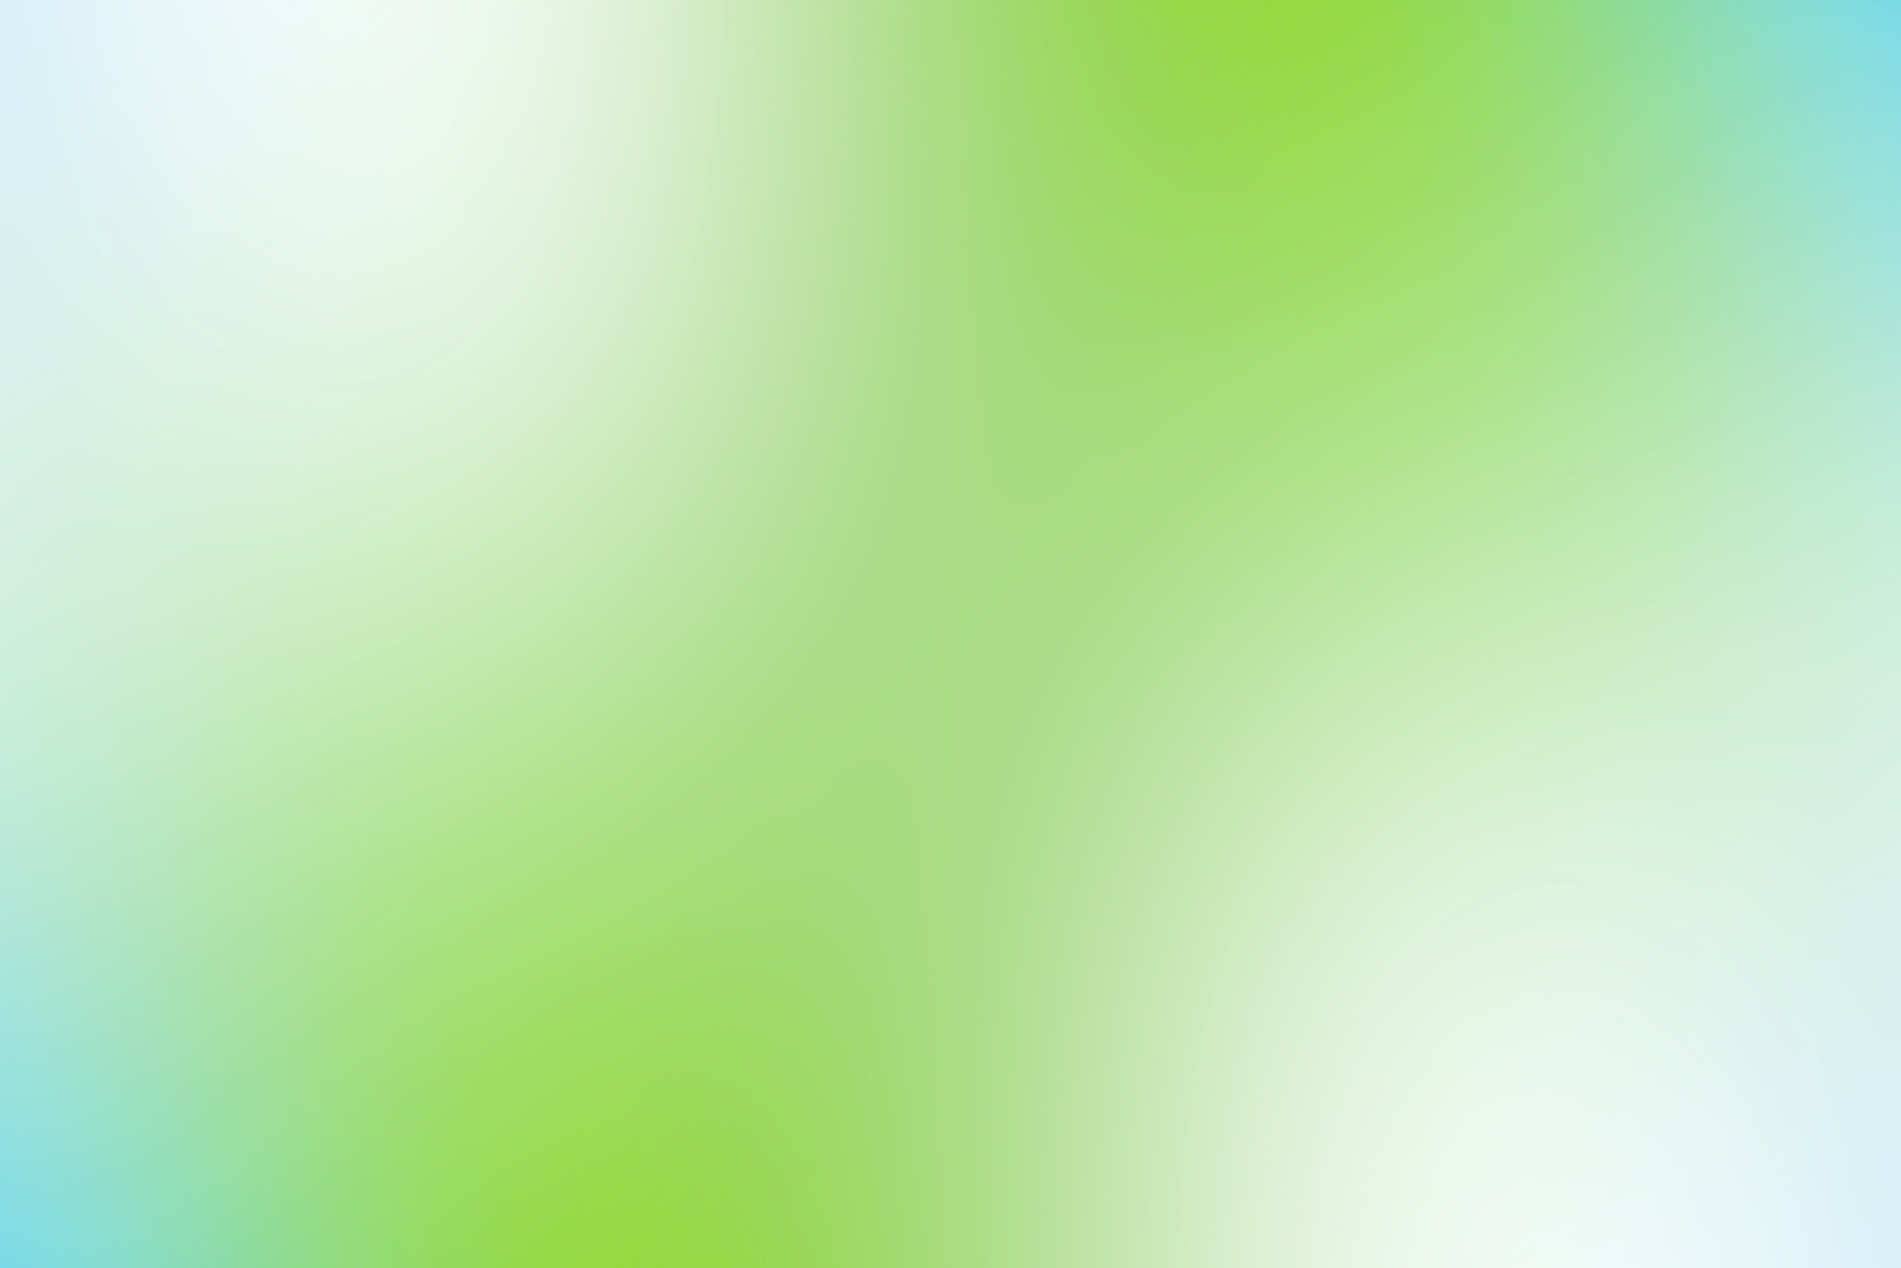 Green Gradient Background / Abstract Blurry Fresh Green Background